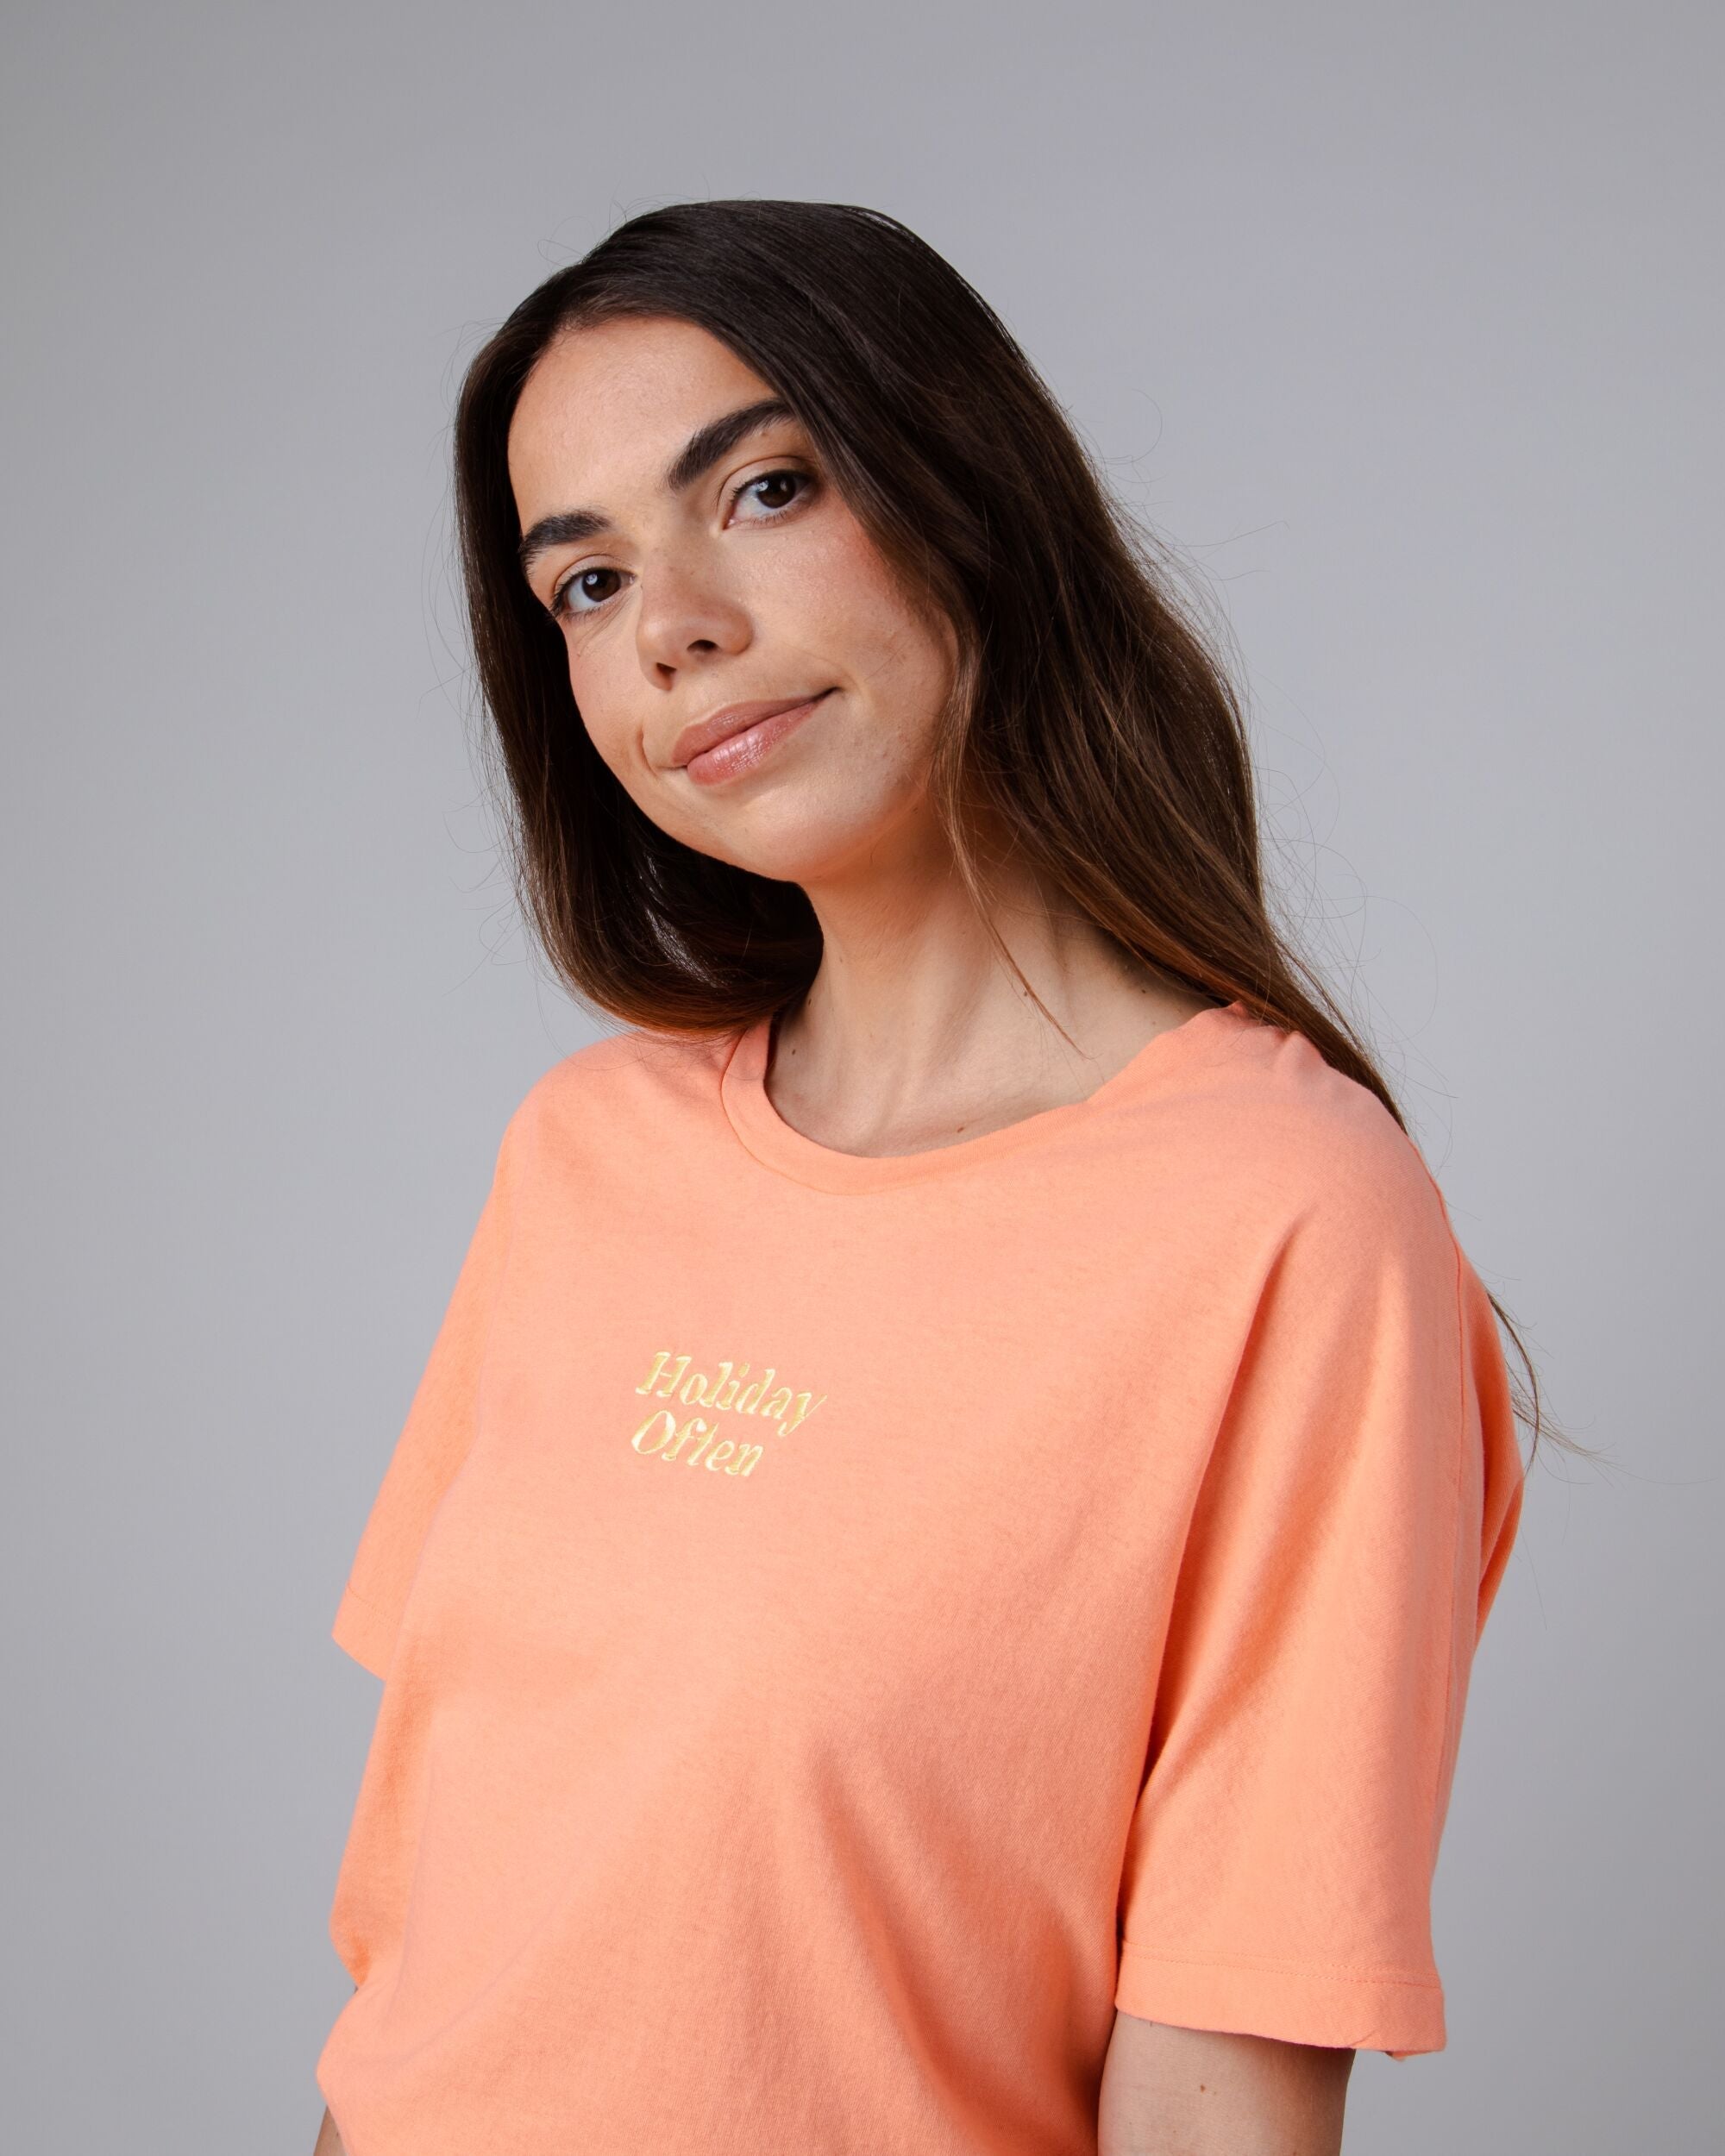 Oversize T-shirt Holidays in Coral made from organic cotton by Brava Fabrics